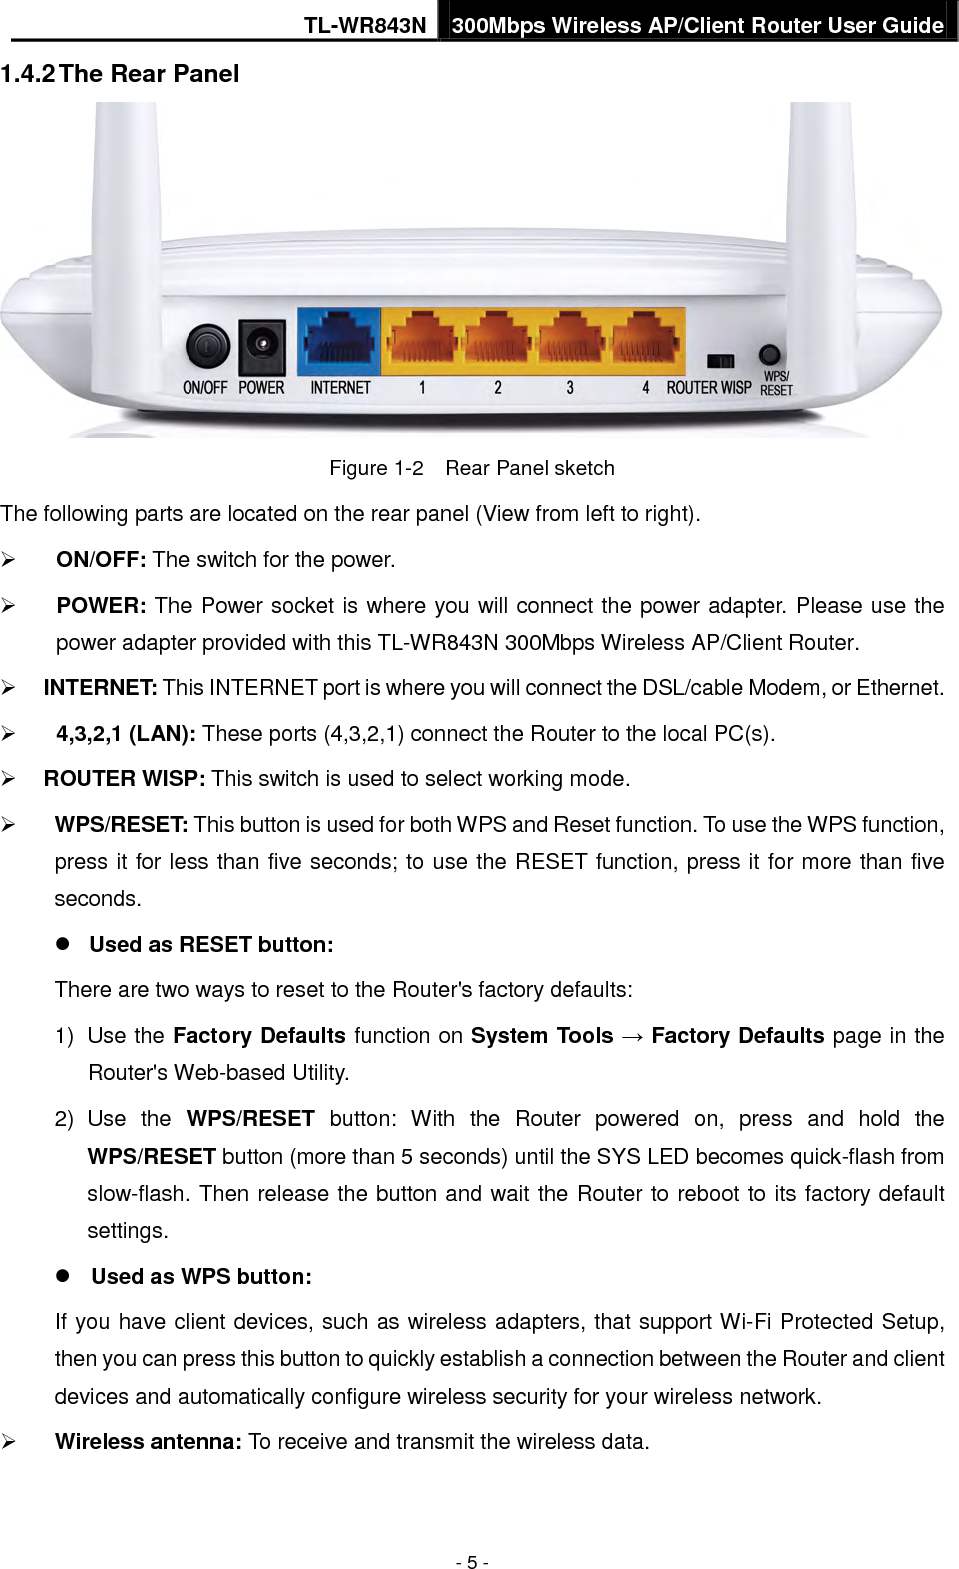 TL-WR843N 300Mbps Wireless AP/Client Router User Guide - 5 - 1.4.2 The Rear Panel Figure 1-2    Rear Panel sketch The following parts are located on the rear panel (View from left to right). ON/OFF: The switch for the power.POWER: The Power socket is where you will connect the power adapter. Please use thepower adapter provided with this TL-WR843N 300Mbps Wireless AP/Client Router.INTERNET: This INTERNET port is where you will connect the DSL/cable Modem, or Ethernet.4,3,2,1 (LAN): These ports (4,3,2,1) connect the Router to the local PC(s).ROUTER WISP: This switch is used to select working mode.WPS/RESET: This button is used for both WPS and Reset function. To use the WPS function,press it for less than five seconds; to use the RESET function, press it for more than fiveseconds.Used as RESET button:There are two ways to reset to the Router&apos;s factory defaults: 1) Use the Factory Defaults function on System Tools → Factory Defaults page in theRouter&apos;s Web-based Utility.2) Use the WPS/RESET button:  With the  Router powered on, press and hold theWPS/RESET button (more than 5 seconds) until the SYS LED becomes quick-flash fromslow-flash. Then release the button and wait the Router to reboot to its factory defaultsettings.Used as WPS button:If you have client devices, such as wireless adapters, that support Wi-Fi Protected Setup, then you can press this button to quickly establish a connection between the Router and client devices and automatically configure wireless security for your wireless network. Wireless antenna: To receive and transmit the wireless data.